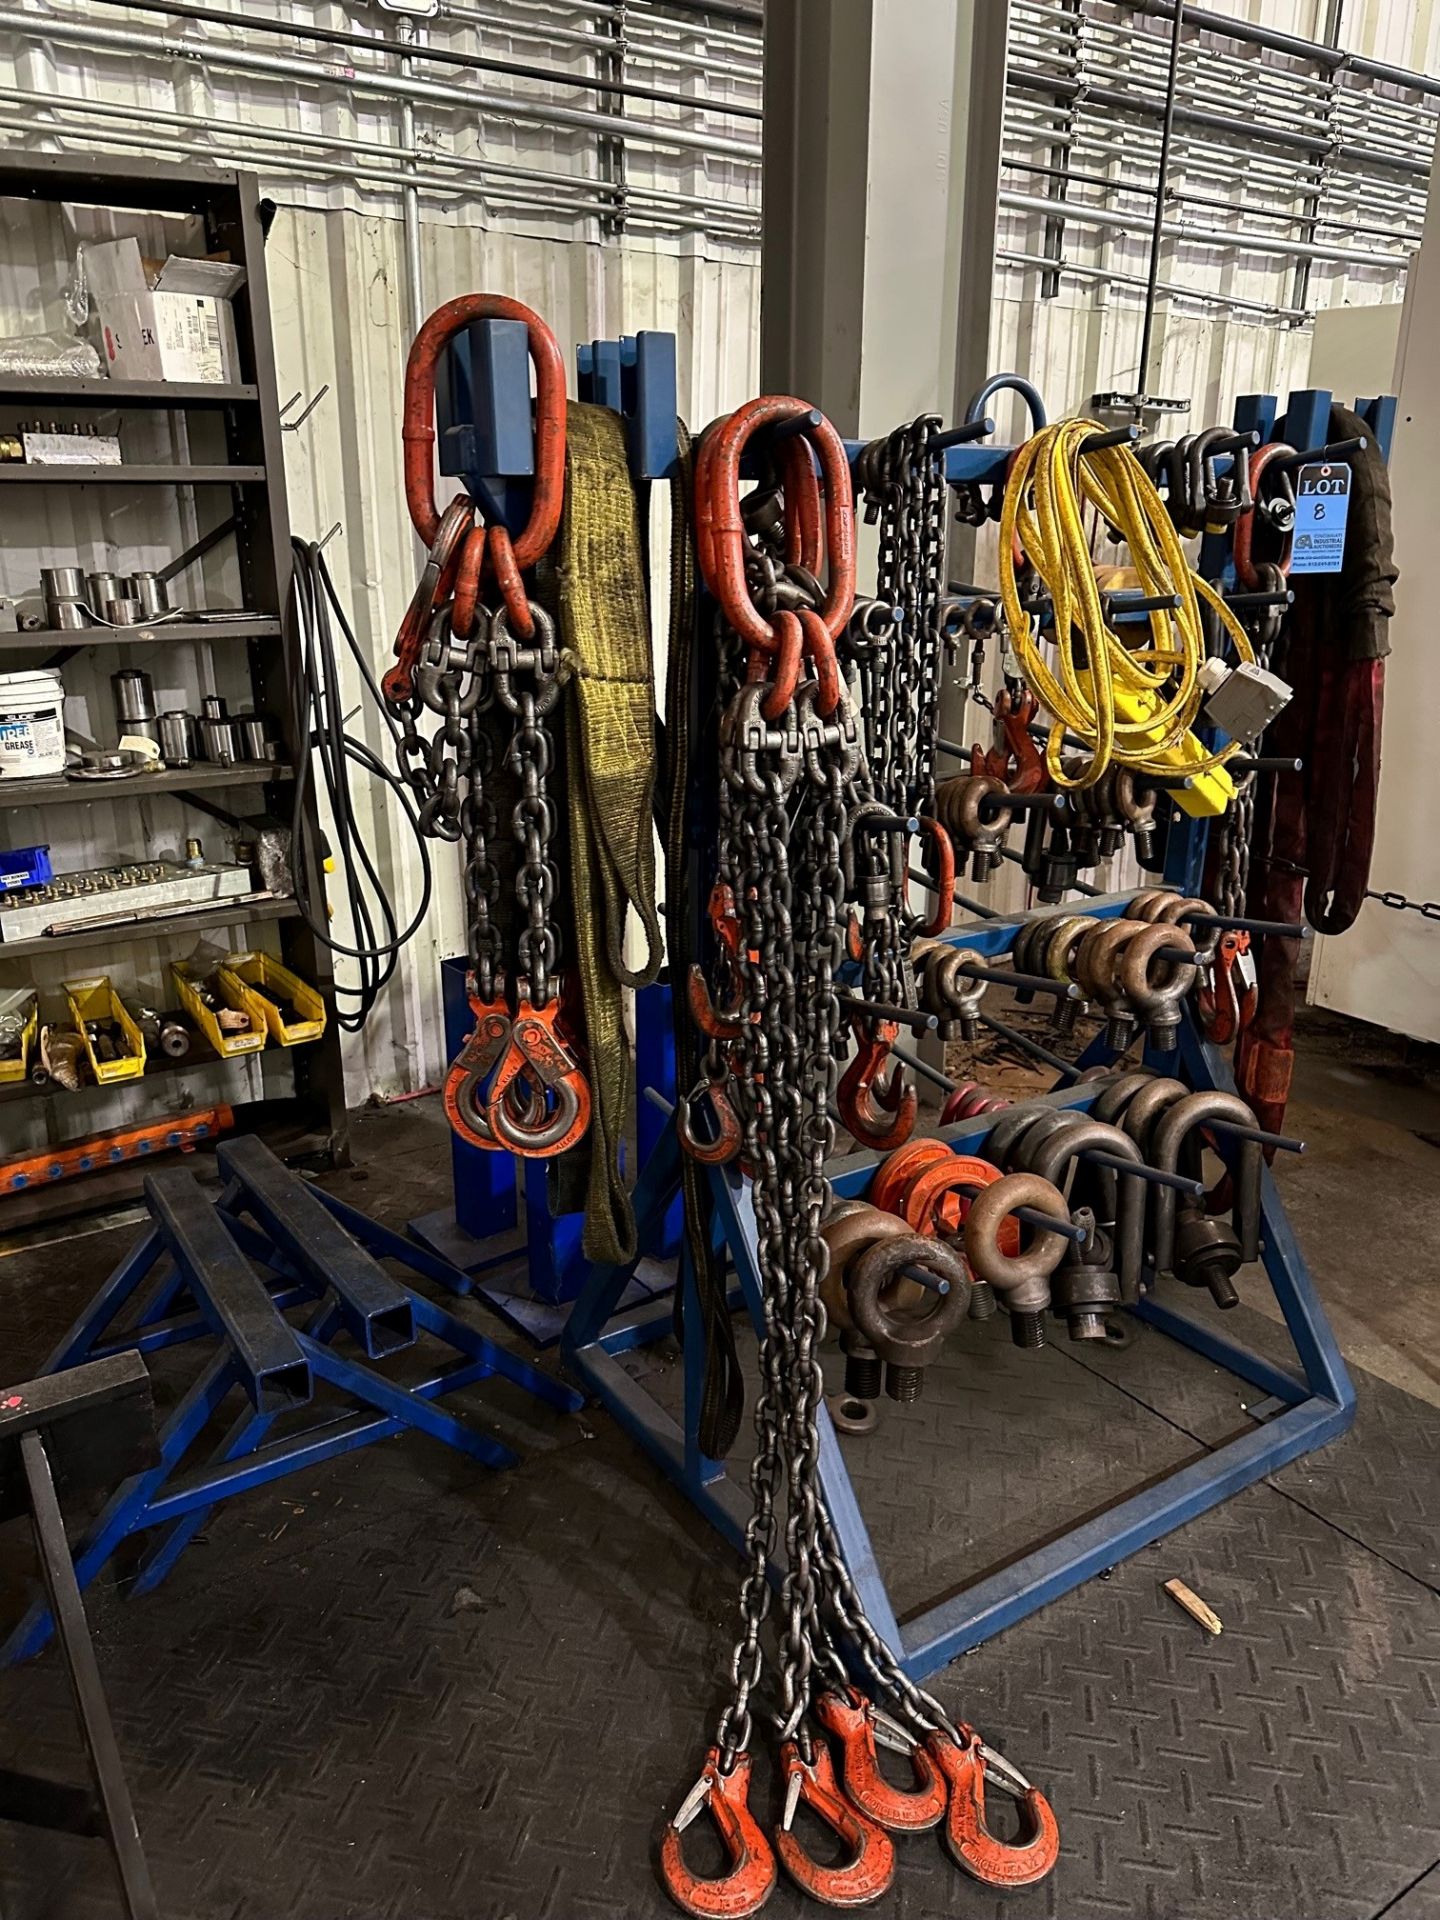 (LOT) LIFTING EQUIPMENT INCLUDING CHAINS, LIFTING EYES, SLINGS AND RELATED - Image 2 of 3